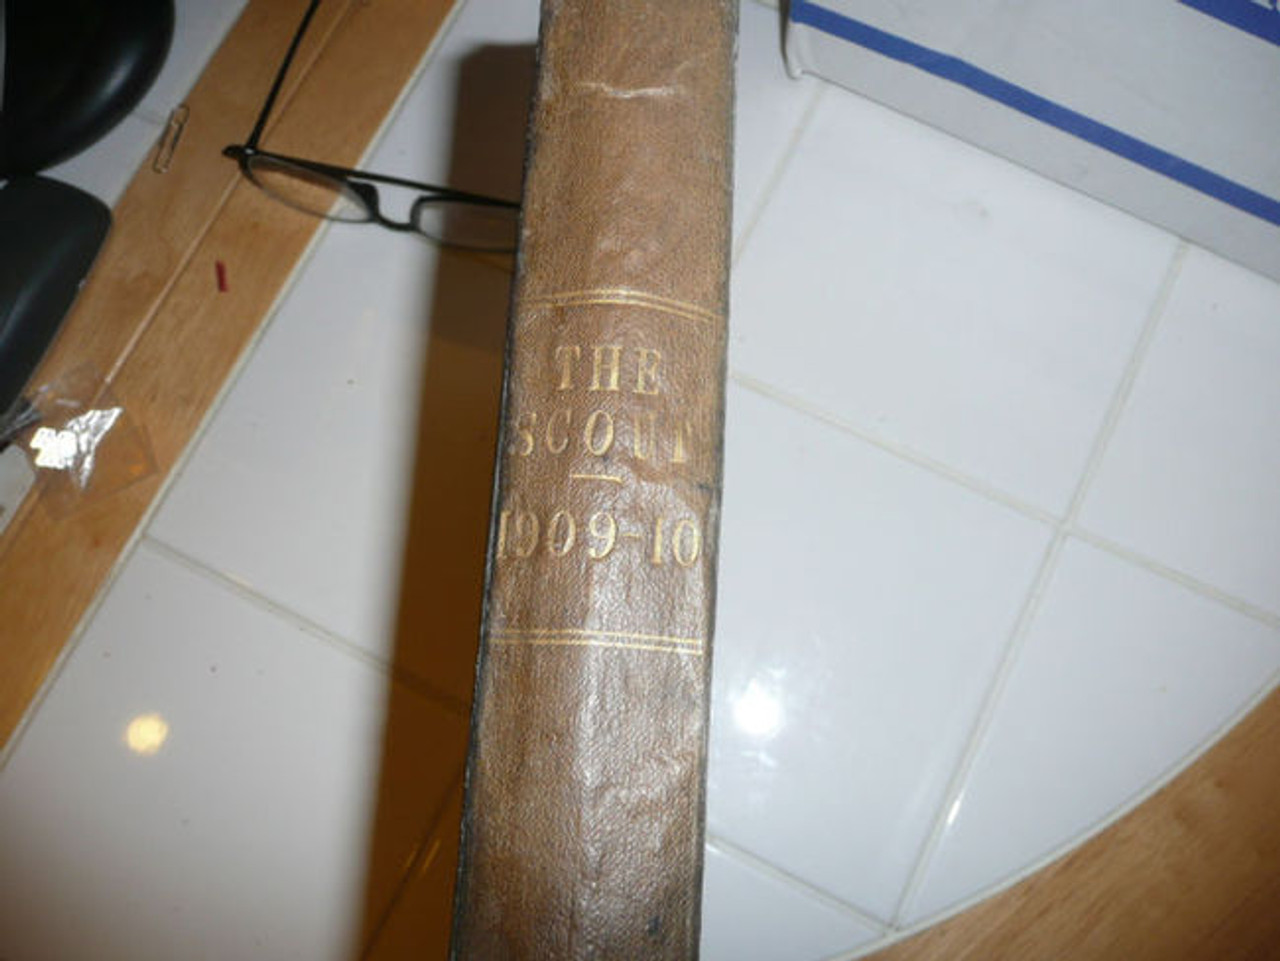 1909-1910 Bound Volume "The Scout" Magazine of the British Boy Scout Association